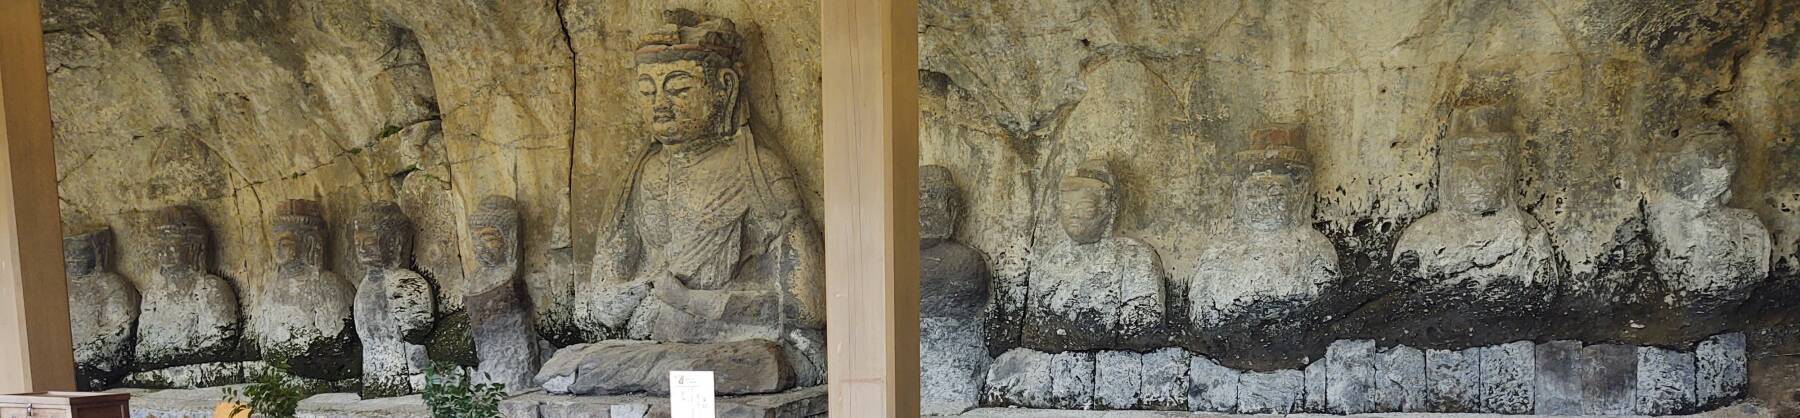 Group of Buddhas carved into a tuff cliff face.